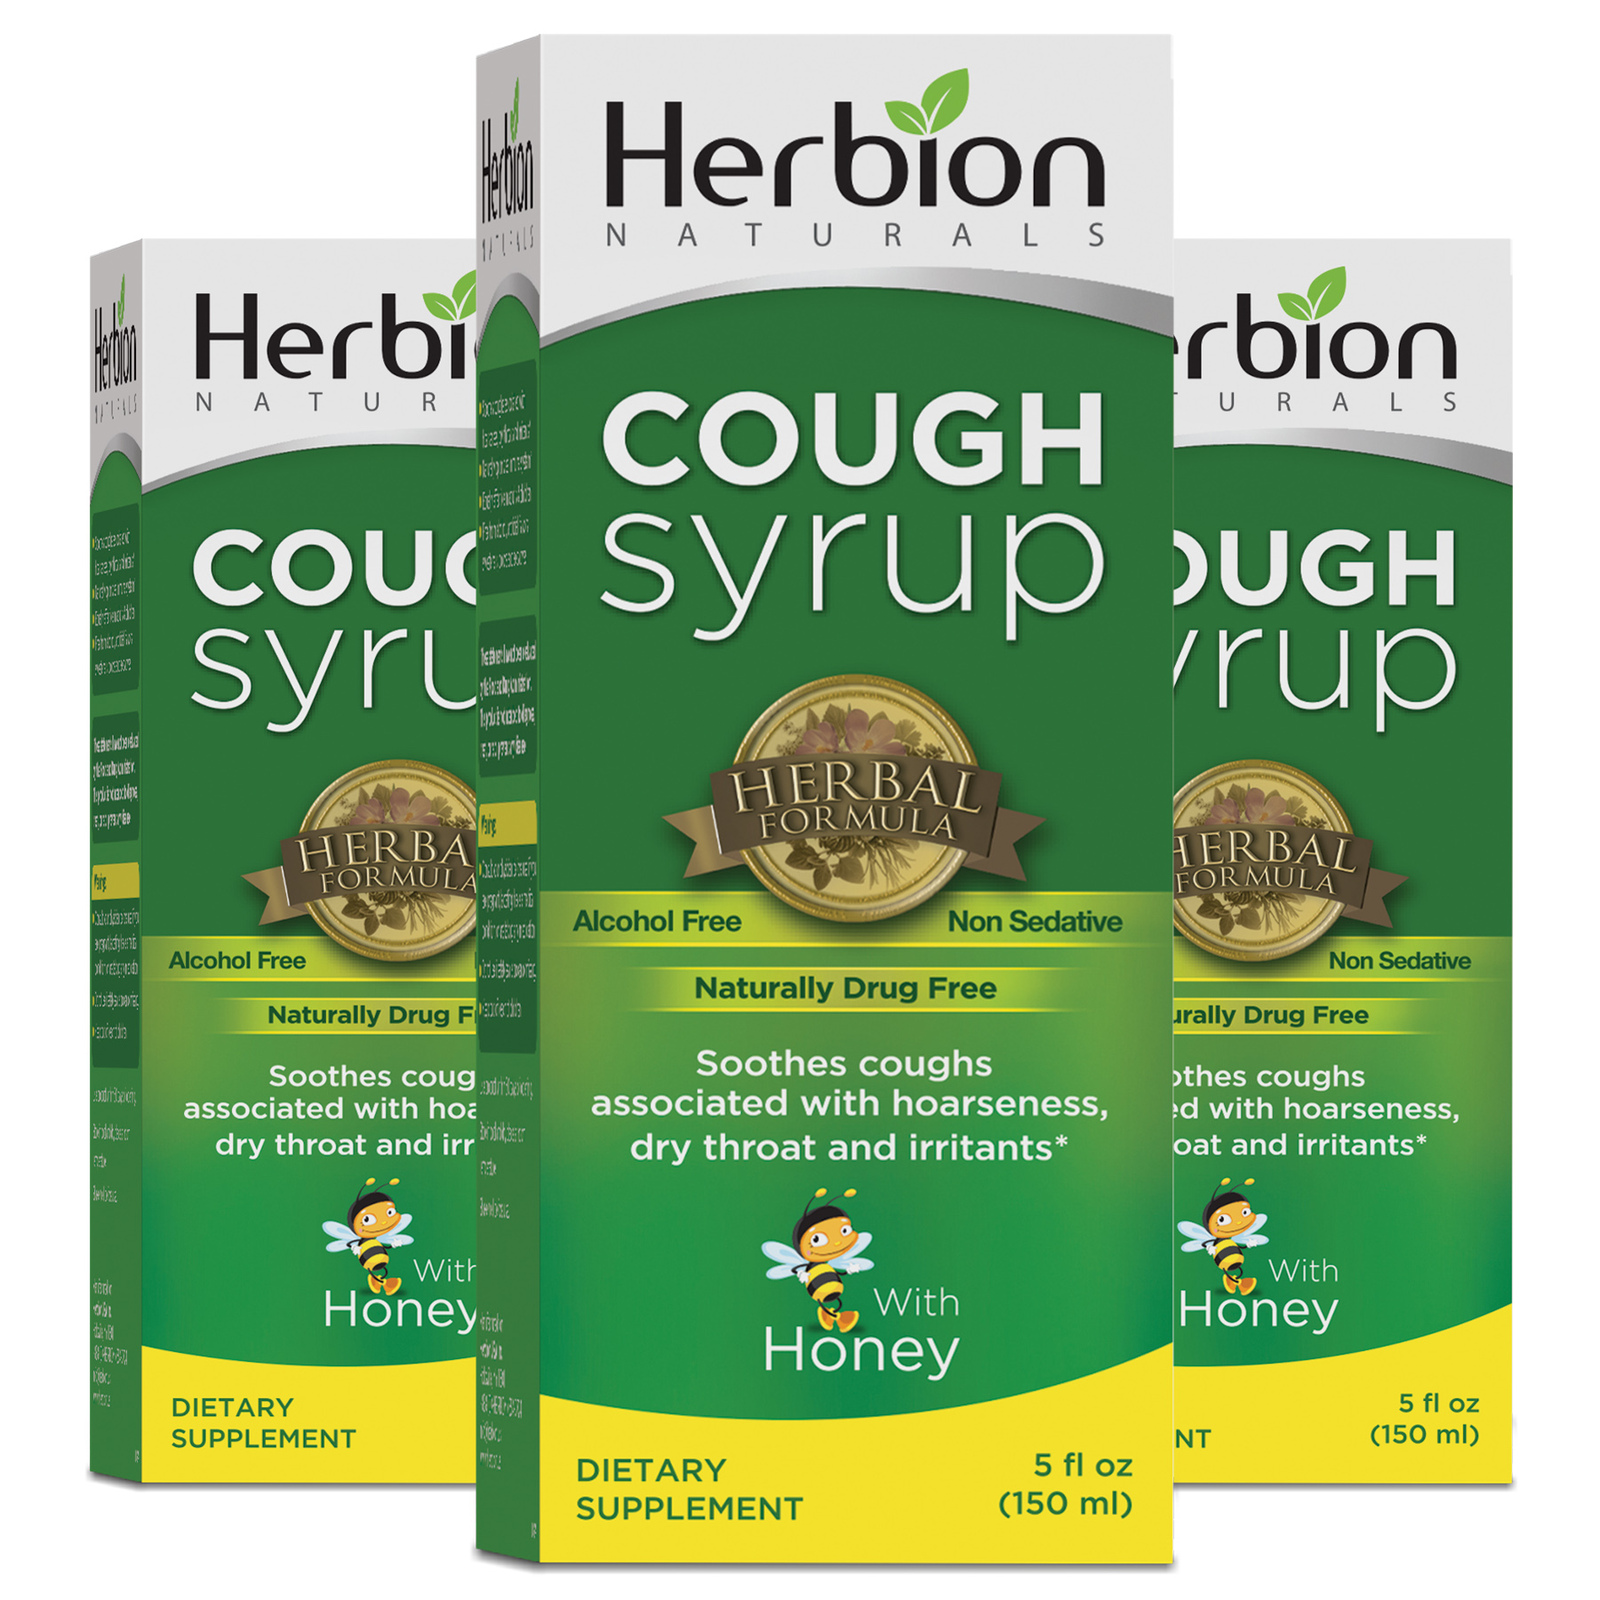 Herbion Naturals Cough Syrup with Honey, 5 fl oz